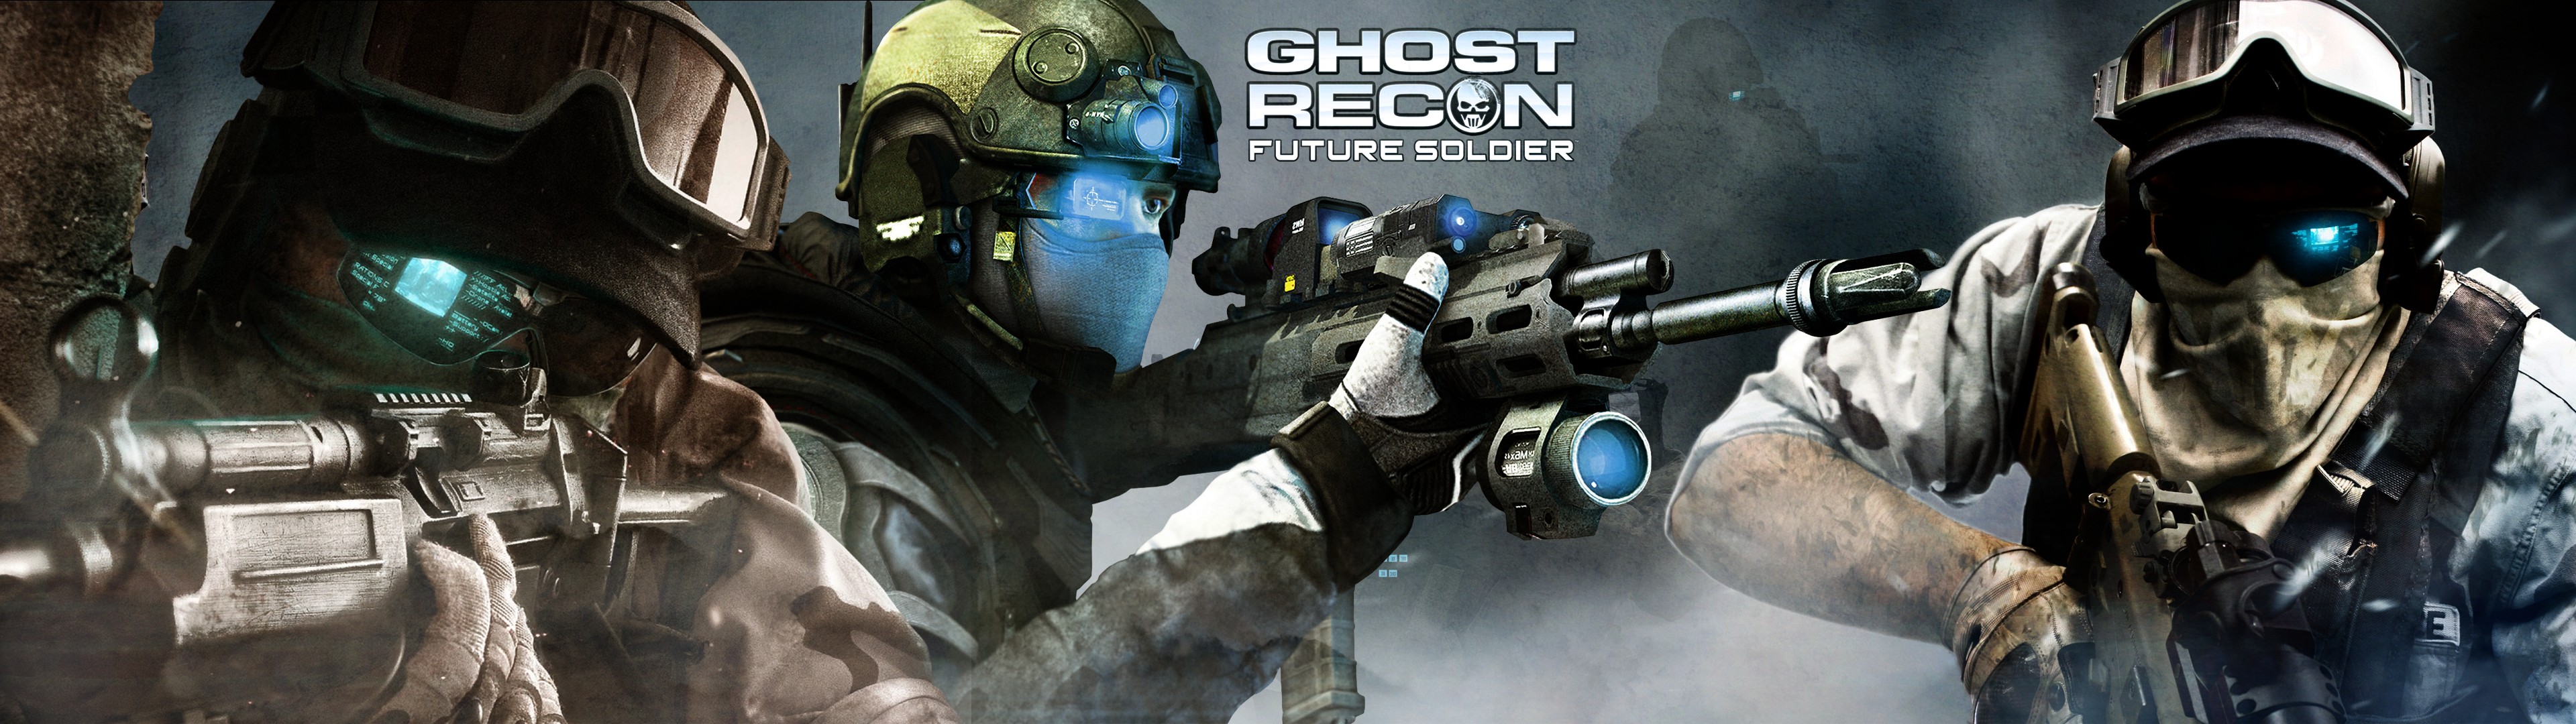 Ghost Recon, Special forces, Tactical, Military, Video games, Smoke, Assault rifle, Dual monitors, Multiple display Wallpaper